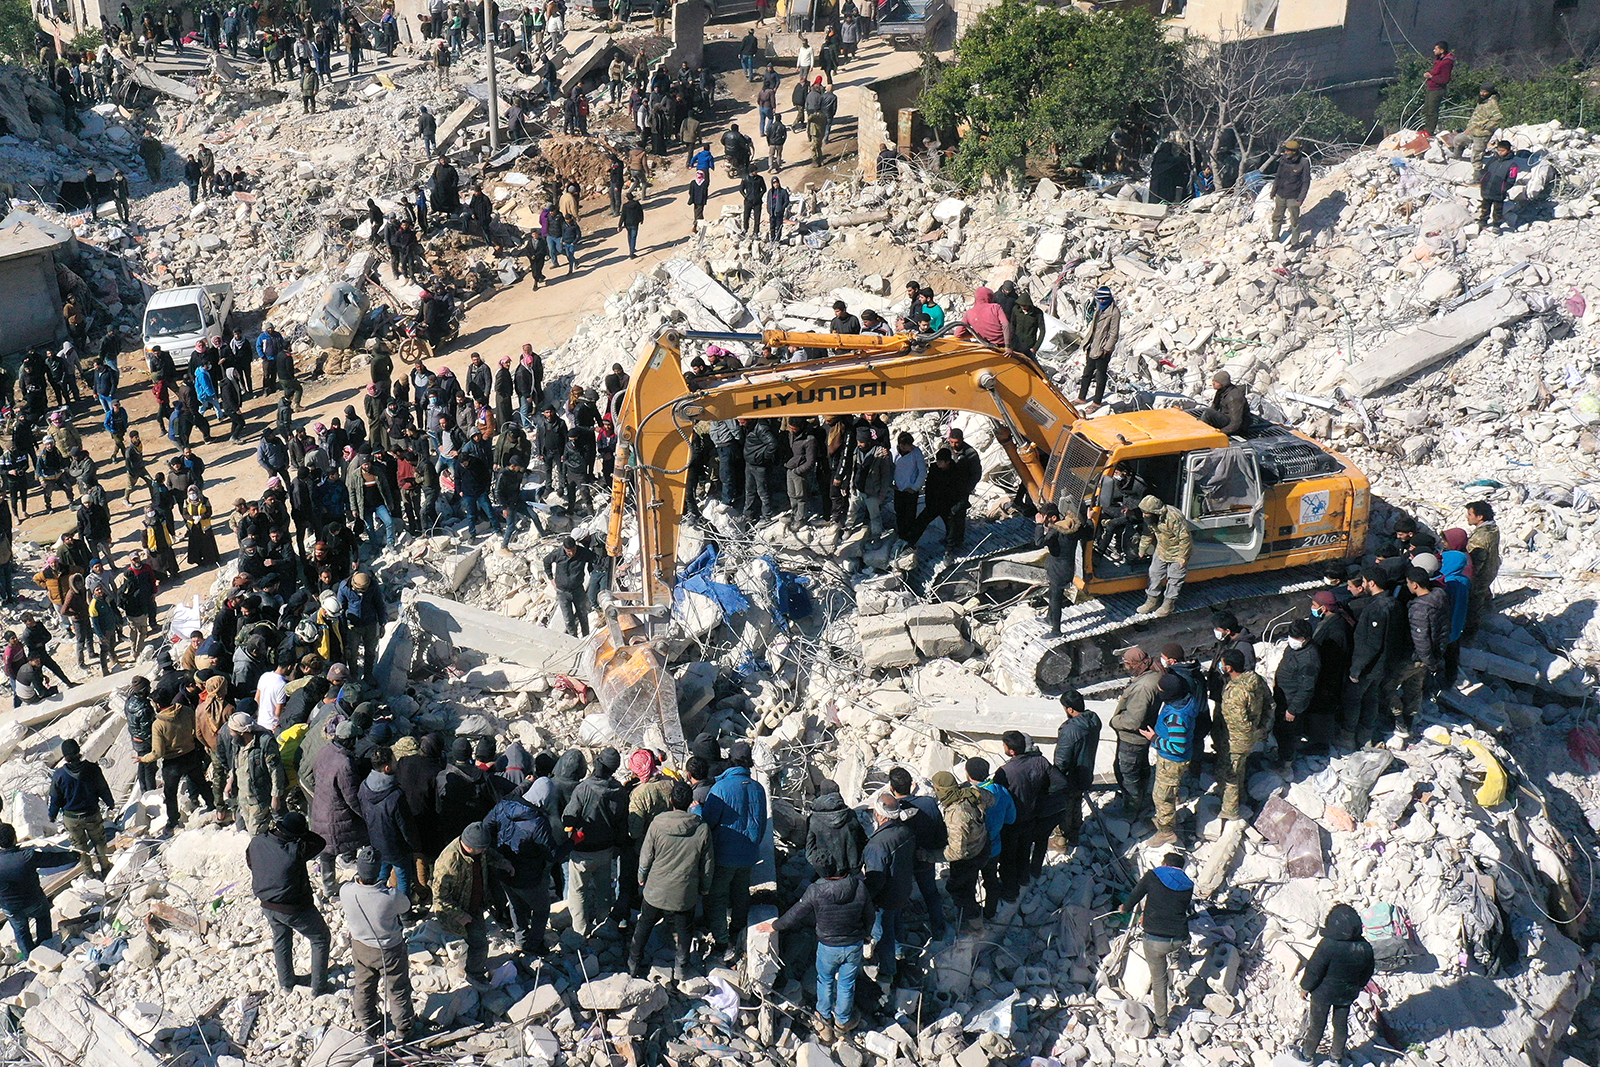 This aerial view shows rescuers searching for survivors amidst the rubble of a collapsed building in the town of Harim, Syria, on the border with Turkey, on February 8.